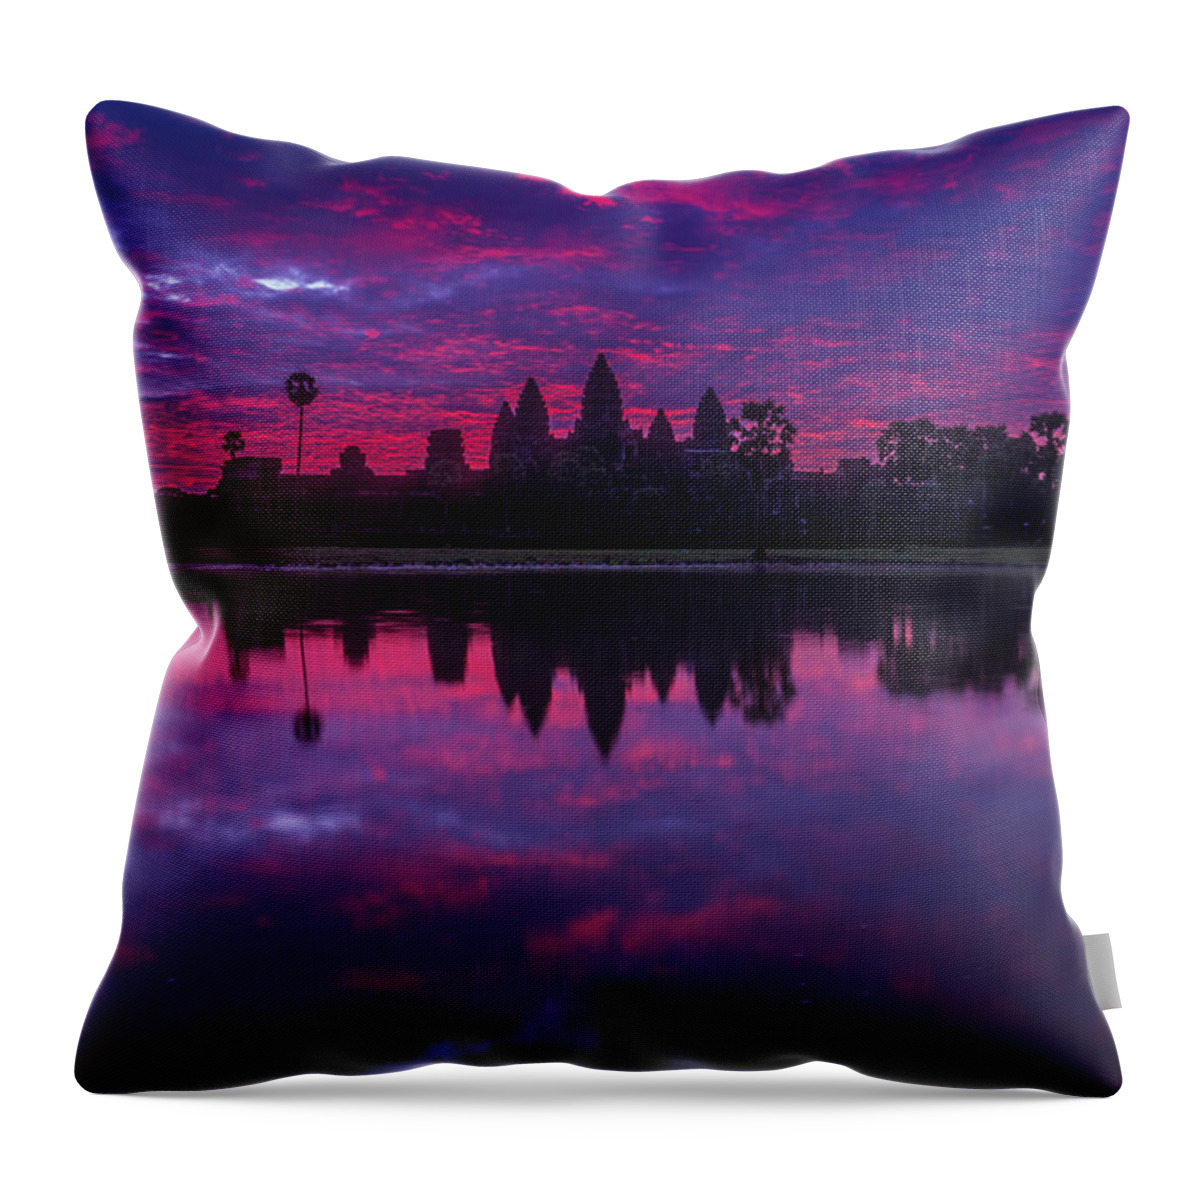 Cambodia Throw Pillow featuring the photograph Sunrise Angkor Wat Reflection by Mike Reid